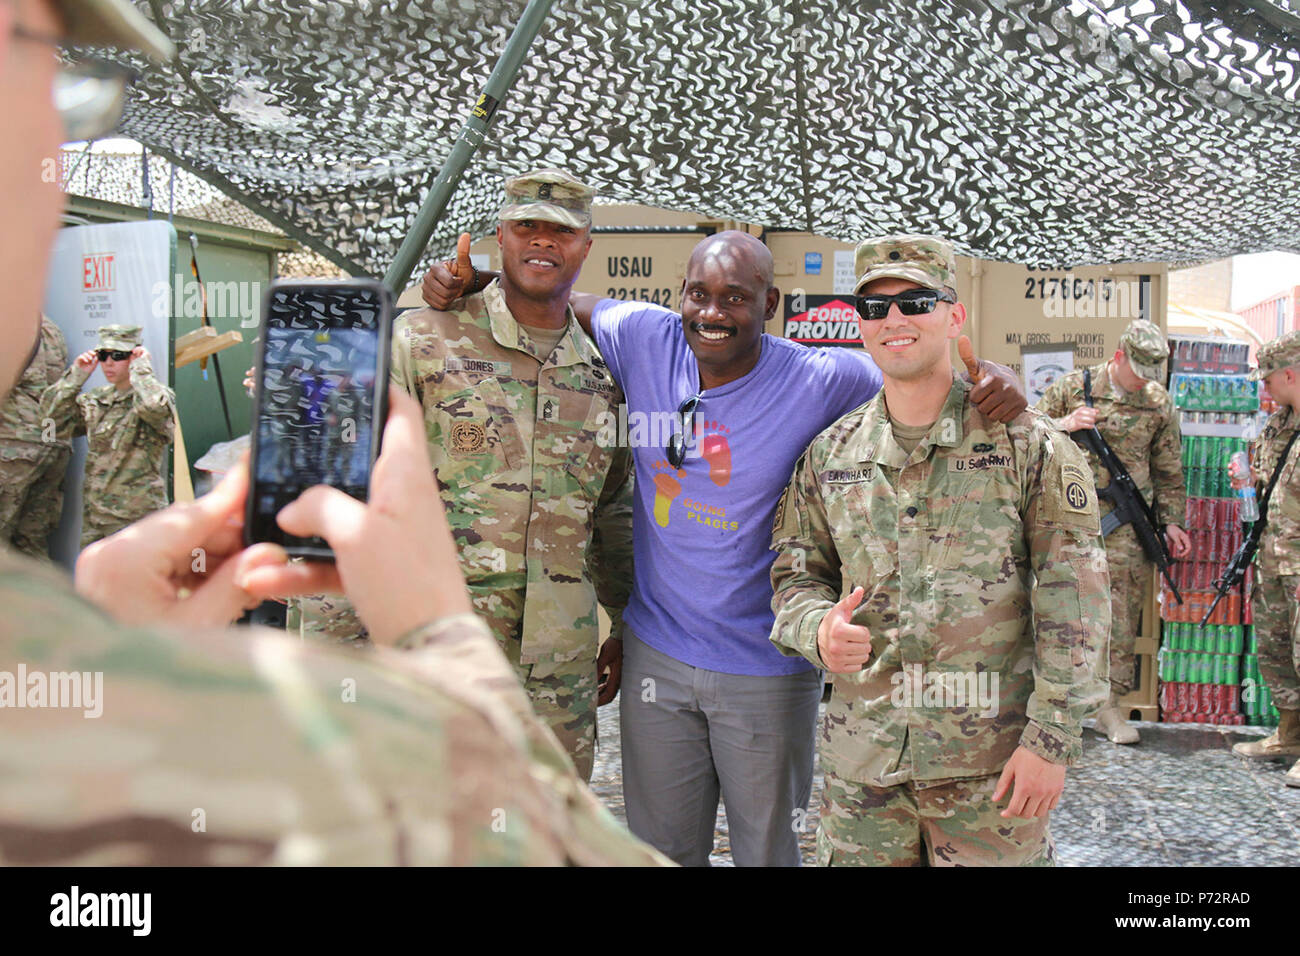 Paratroopers from 2nd BCT, 82nd Airborne Division, pose with stand-up comic, Rawle Lewis, near Makhmour, Iraq, May 11, 2017. Lewis performed as part of the Comedy Comrades Tour, sponsored by Armed Forces Entertainment, the official Department of Defense agency providing entertainment to deployed military personnel. The Paratroopers, deployed in support of Combined Joint Task Force-Operation Inherent Resolve, enable their Iraqi security force partners through the advise and assist mission, contributing planning, intelligence collection and analysis, force protection, and precision fires to achi Stock Photo